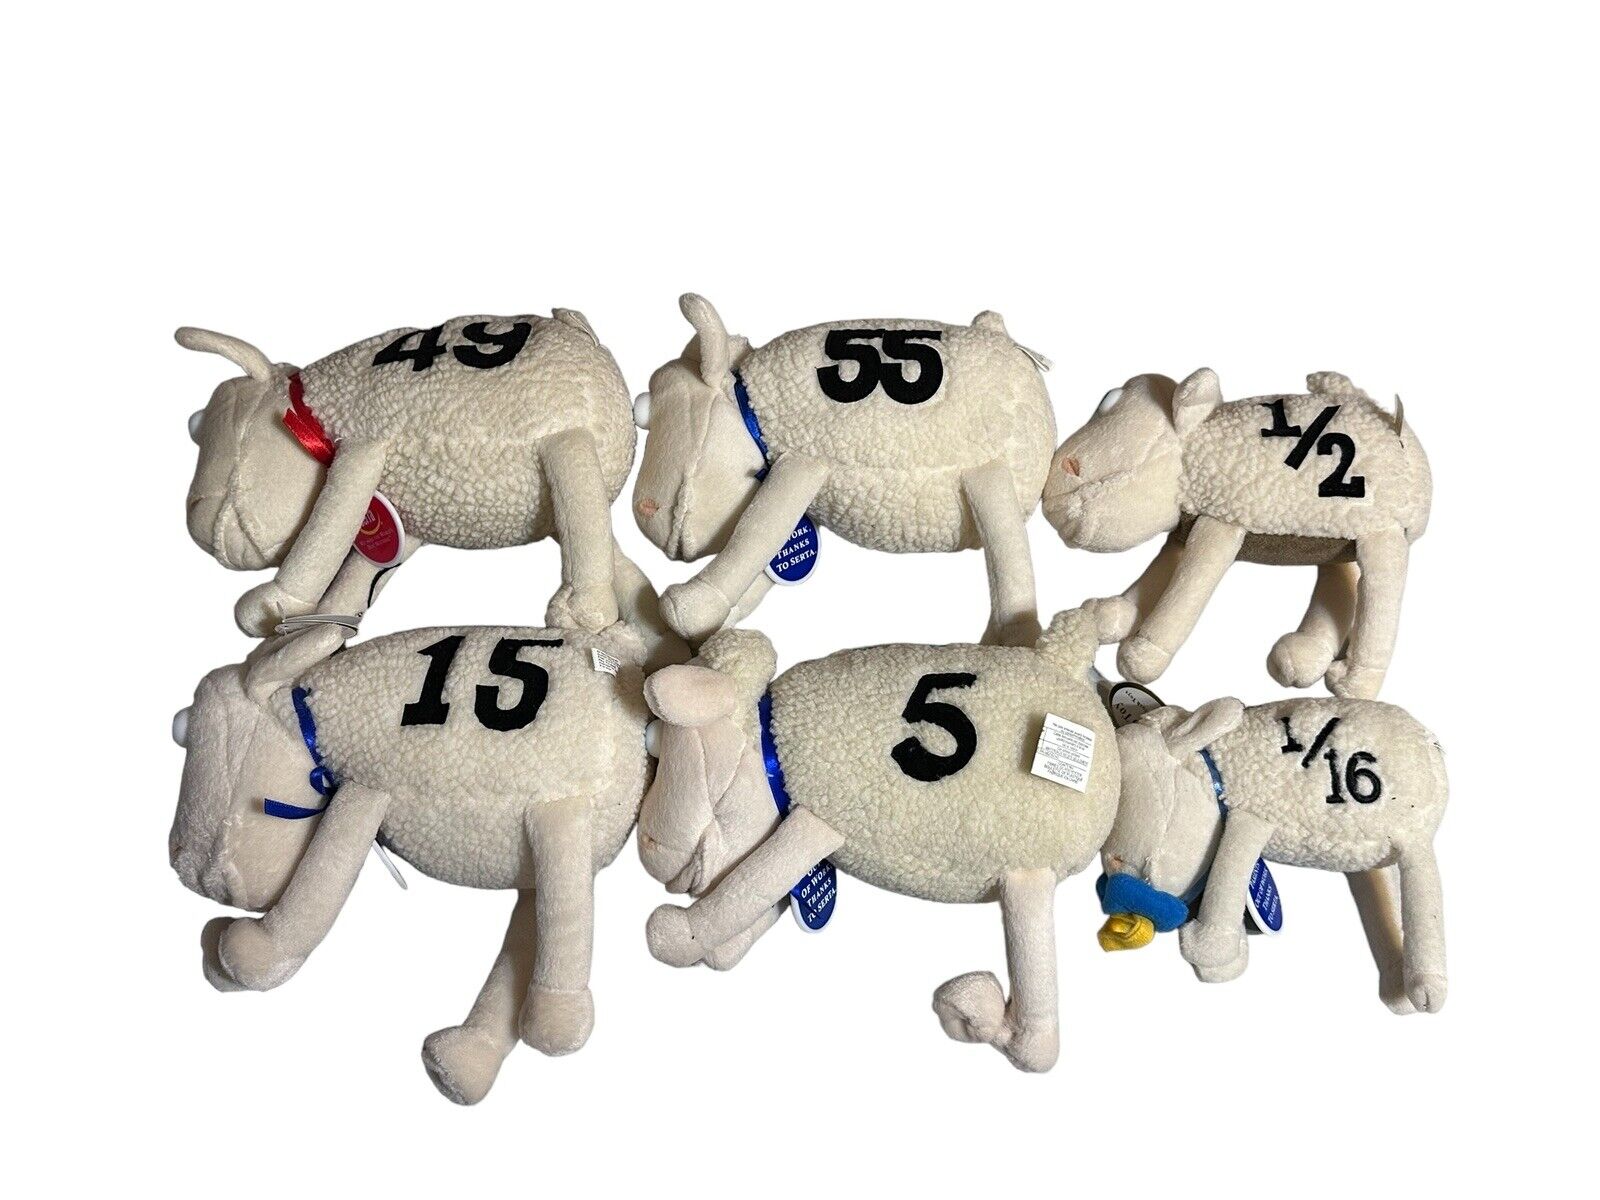 Serta Plush Counting Sheep Lot Of 6 Numbers 55. 49. 15. 5. 1/2. 1/16